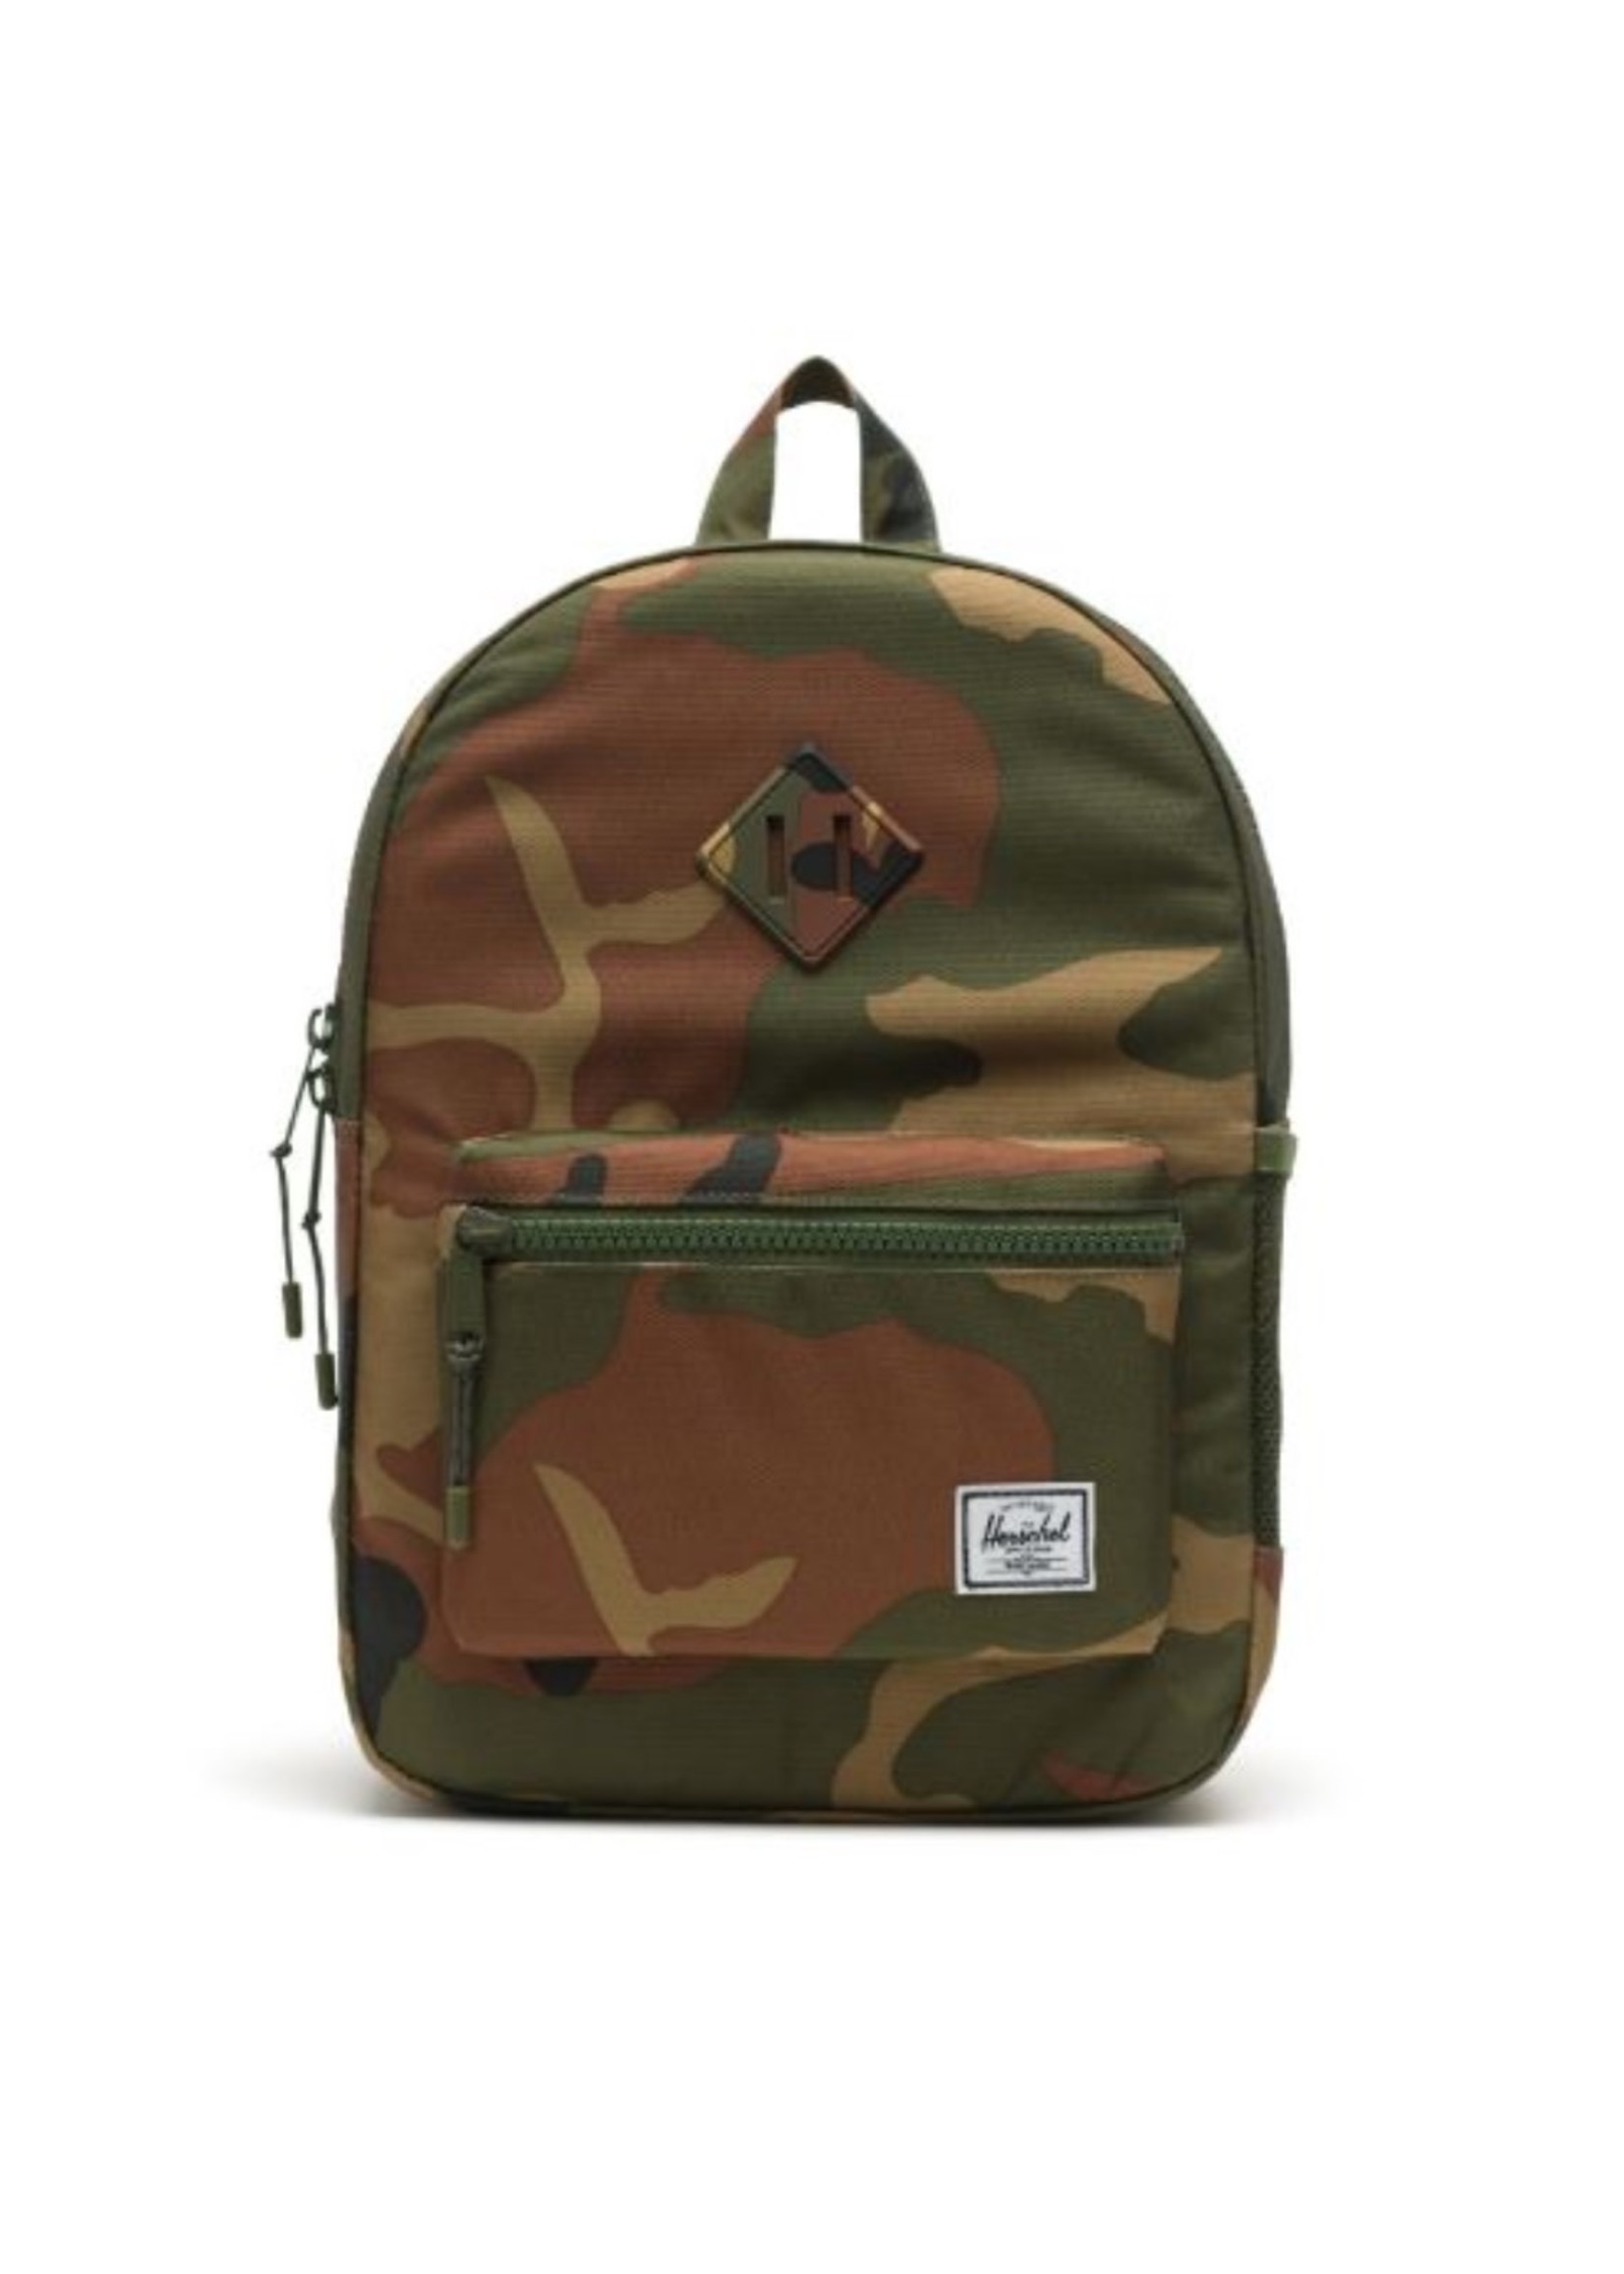 Herschel Supply Co. Heritage Backpack | Youth XL, Woodland Camo, 22L